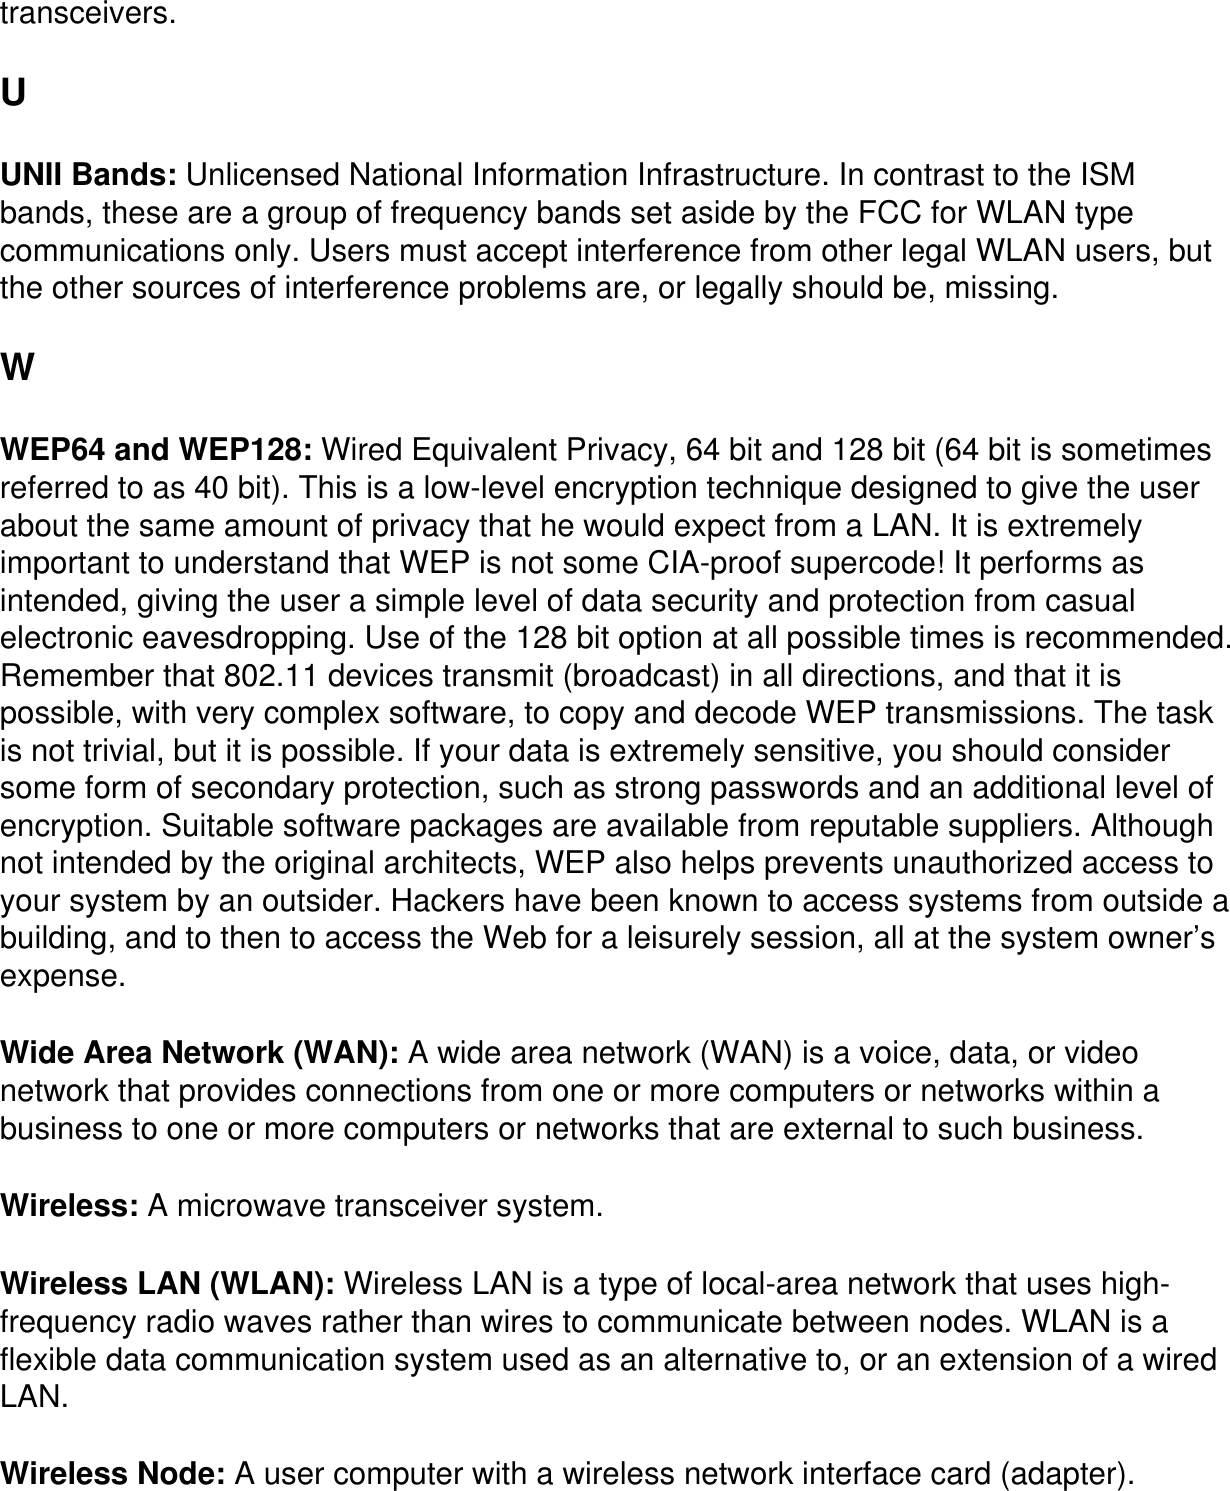 transceivers.U UNII Bands: Unlicensed National Information Infrastructure. In contrast to the ISM bands, these are a group of frequency bands set aside by the FCC for WLAN type communications only. Users must accept interference from other legal WLAN users, but the other sources of interference problems are, or legally should be, missing.W WEP64 and WEP128: Wired Equivalent Privacy, 64 bit and 128 bit (64 bit is sometimes referred to as 40 bit). This is a low-level encryption technique designed to give the user about the same amount of privacy that he would expect from a LAN. It is extremely important to understand that WEP is not some CIA-proof supercode! It performs as intended, giving the user a simple level of data security and protection from casual electronic eavesdropping. Use of the 128 bit option at all possible times is recommended. Remember that 802.11 devices transmit (broadcast) in all directions, and that it is possible, with very complex software, to copy and decode WEP transmissions. The task is not trivial, but it is possible. If your data is extremely sensitive, you should consider some form of secondary protection, such as strong passwords and an additional level of encryption. Suitable software packages are available from reputable suppliers. Although not intended by the original architects, WEP also helps prevents unauthorized access to your system by an outsider. Hackers have been known to access systems from outside a building, and to then to access the Web for a leisurely session, all at the system owner’s expense.Wide Area Network (WAN): A wide area network (WAN) is a voice, data, or video network that provides connections from one or more computers or networks within a business to one or more computers or networks that are external to such business.Wireless: A microwave transceiver system.Wireless LAN (WLAN): Wireless LAN is a type of local-area network that uses high-frequency radio waves rather than wires to communicate between nodes. WLAN is a flexible data communication system used as an alternative to, or an extension of a wired LAN.Wireless Node: A user computer with a wireless network interface card (adapter).